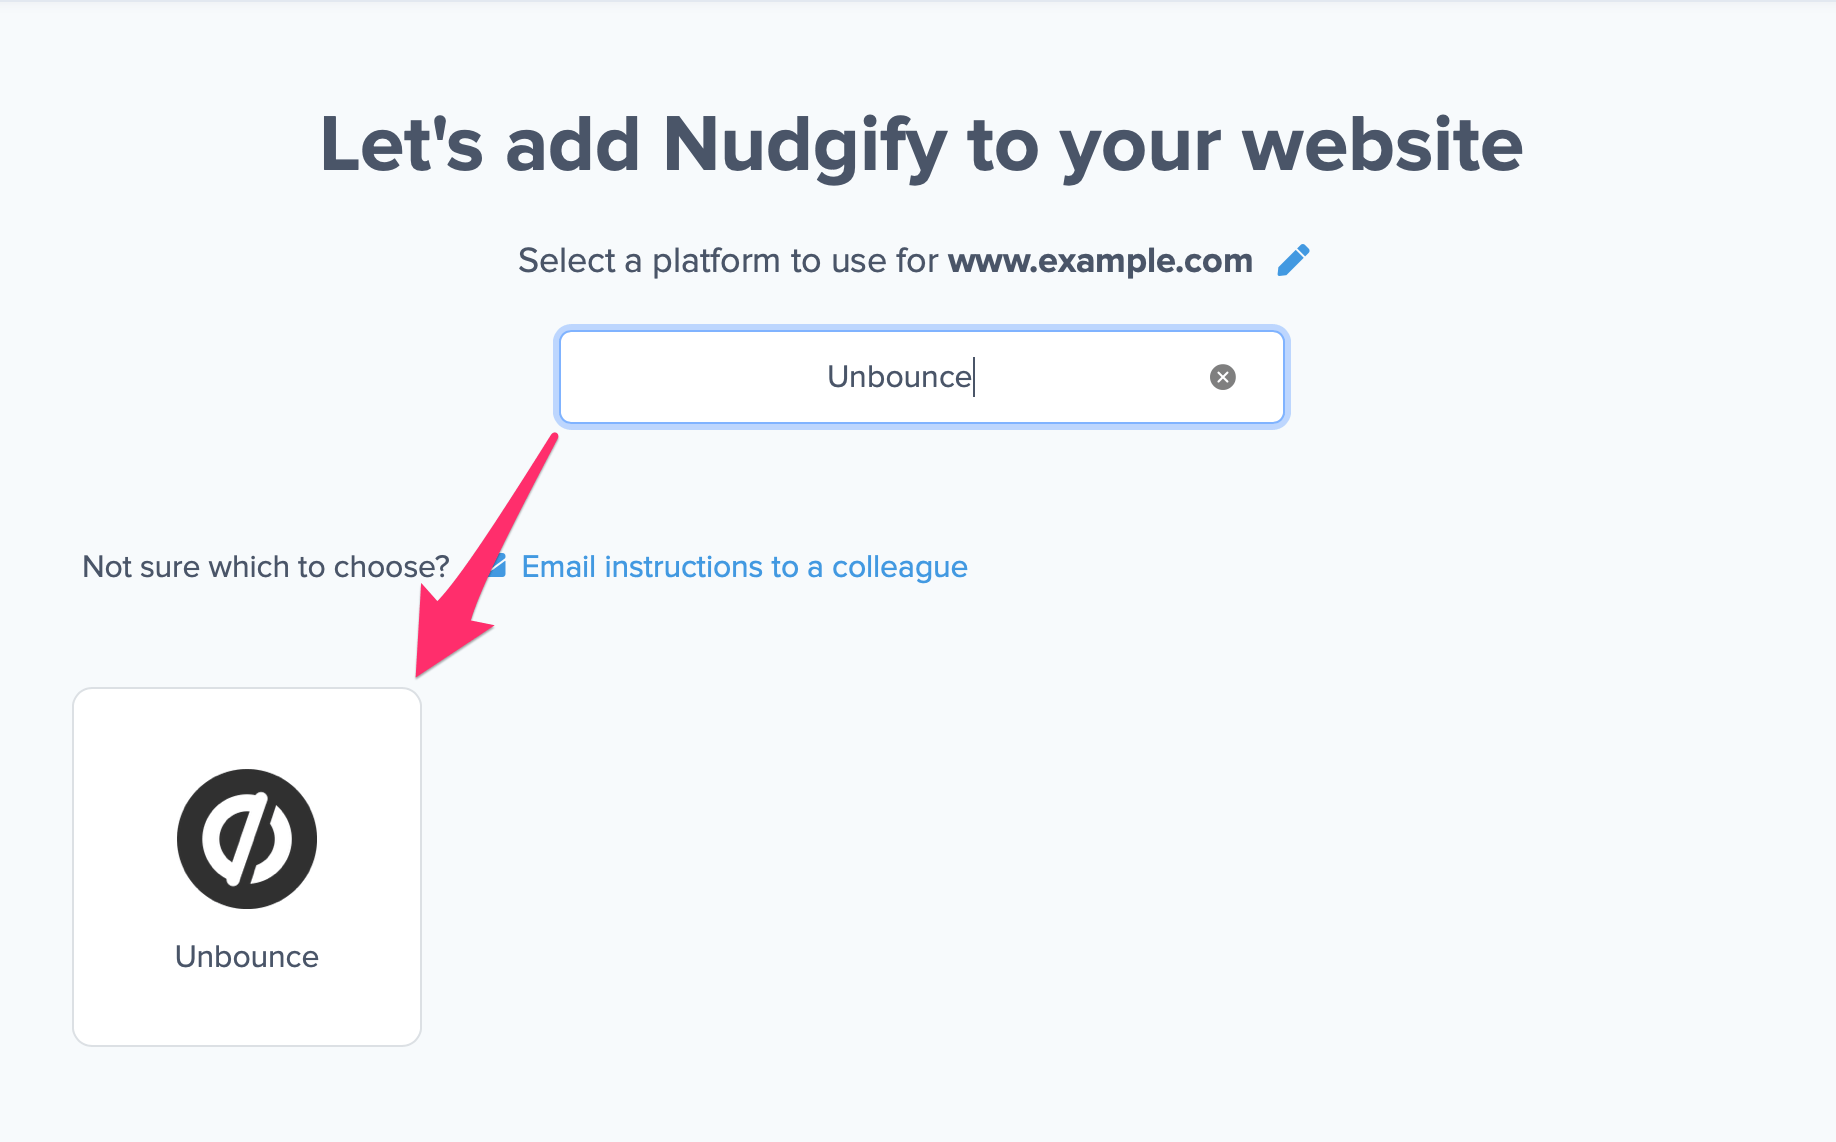 install nudgify with unbound to get social proof